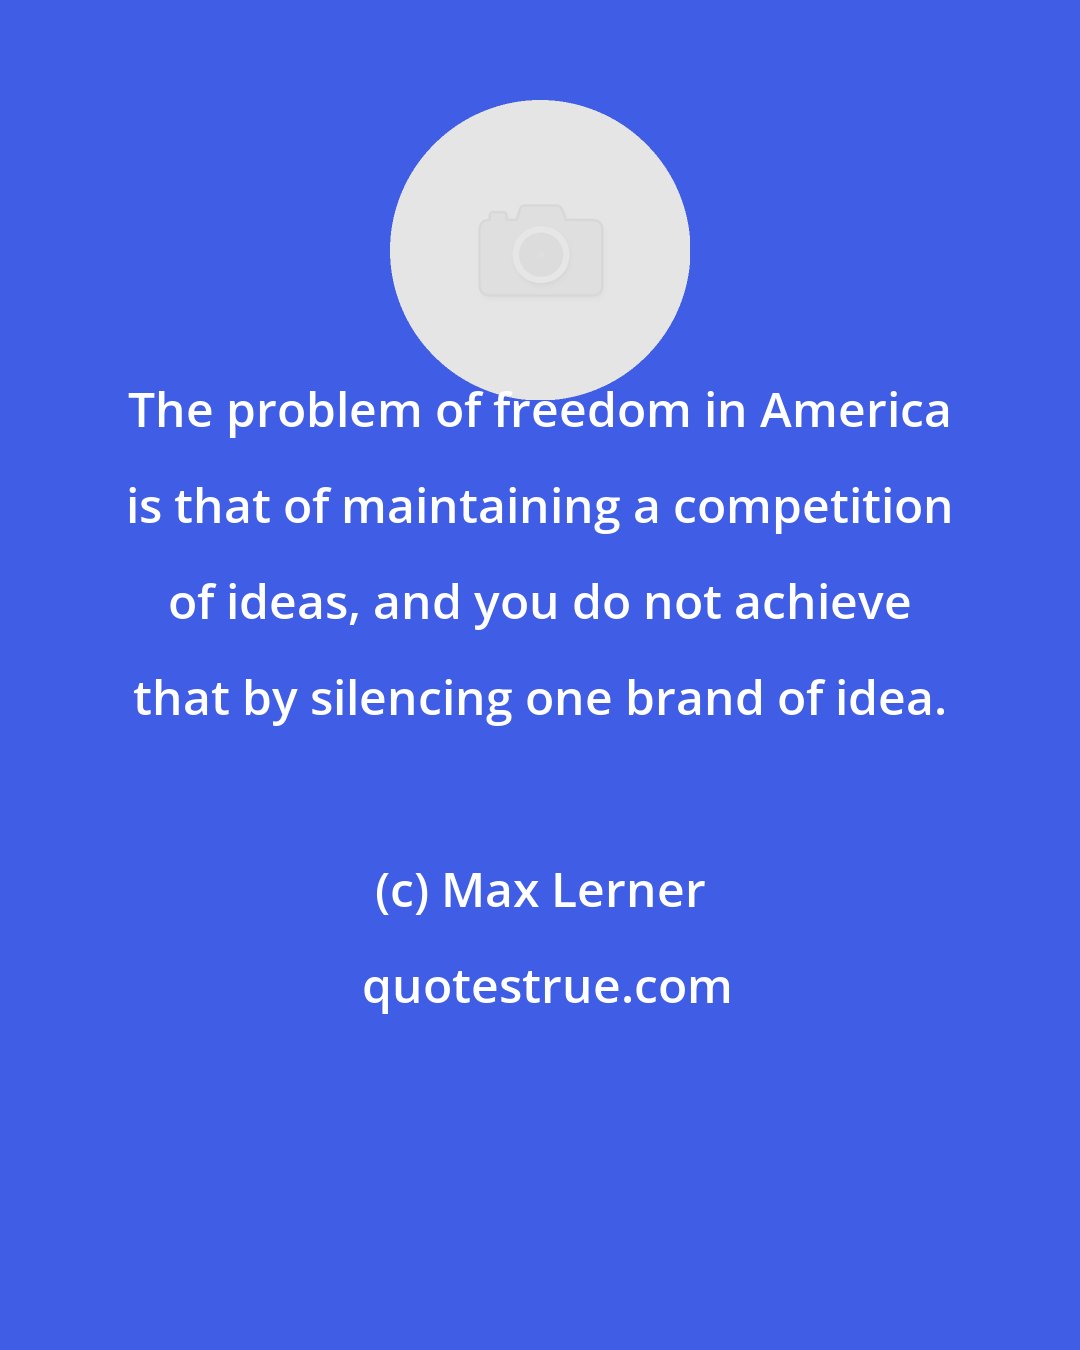 Max Lerner: The problem of freedom in America is that of maintaining a competition of ideas, and you do not achieve that by silencing one brand of idea.